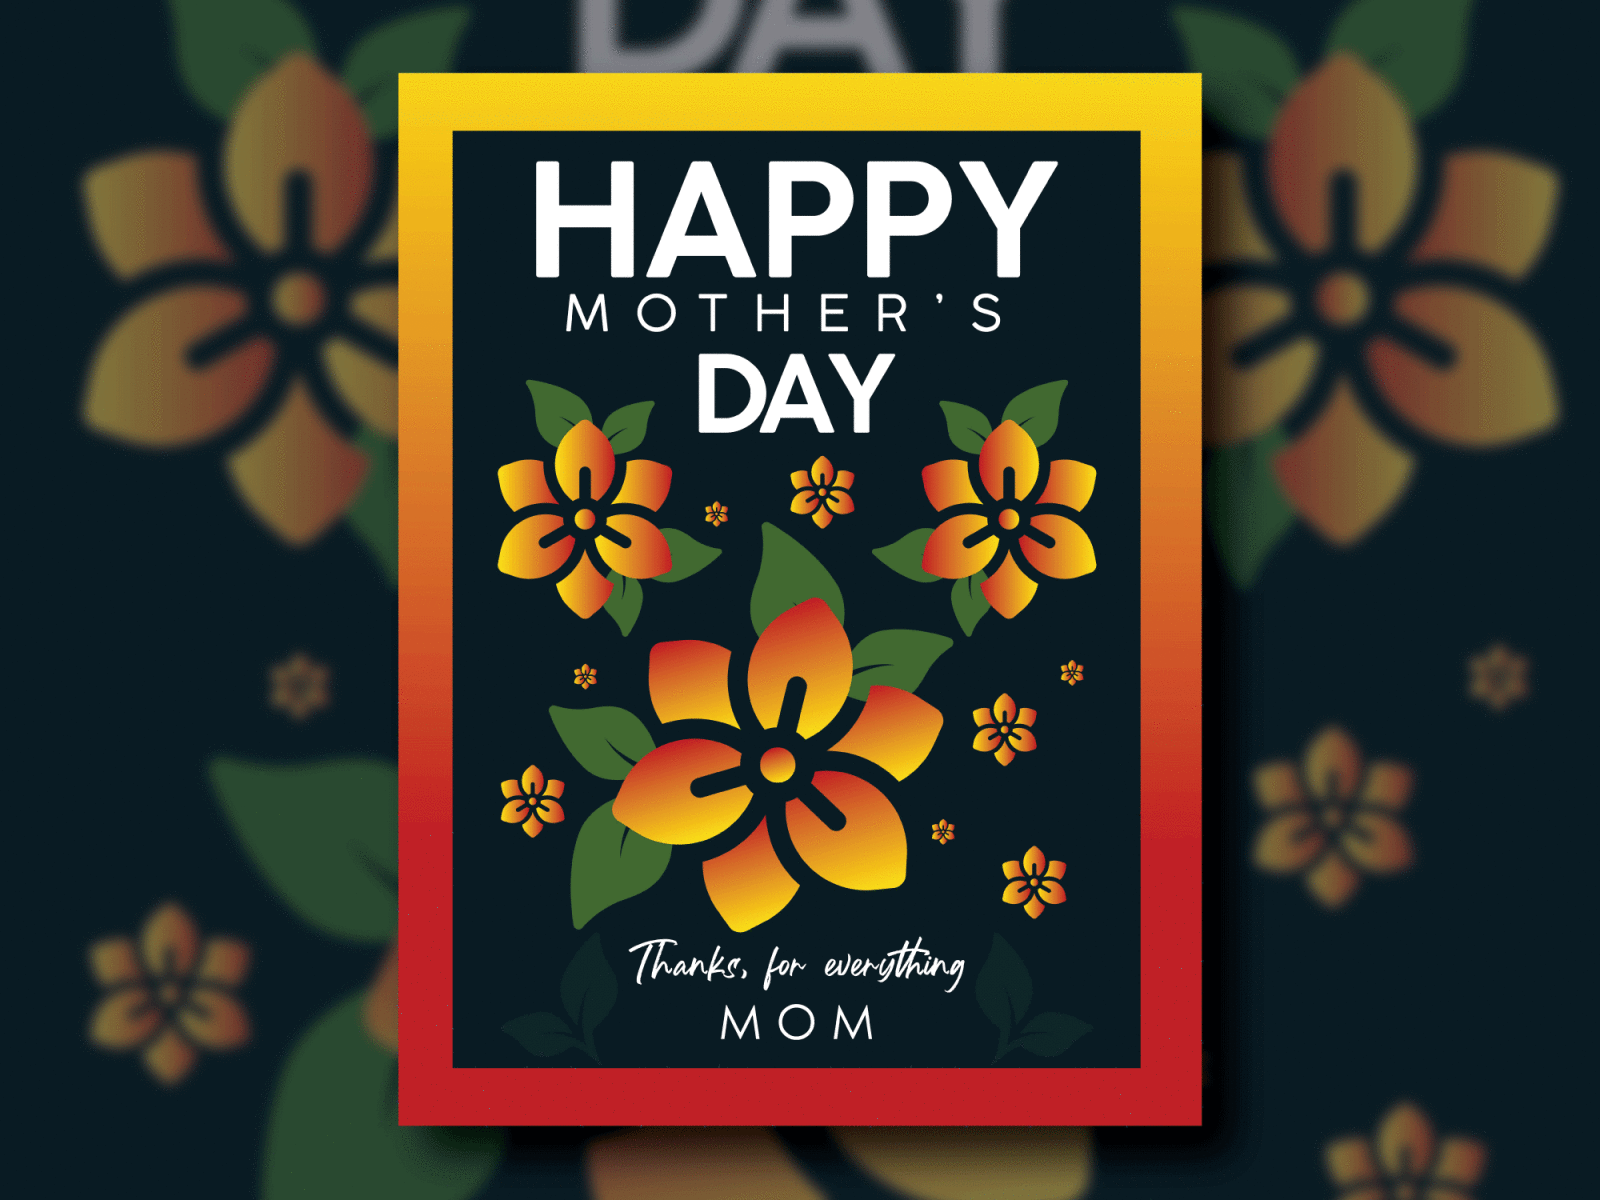 Happy Mother's Day art care design digital art gift gift cards gifts illustrator invite love mom mothers mothers day mothers day flyer mothersday mothership mummy thanks wish wishes